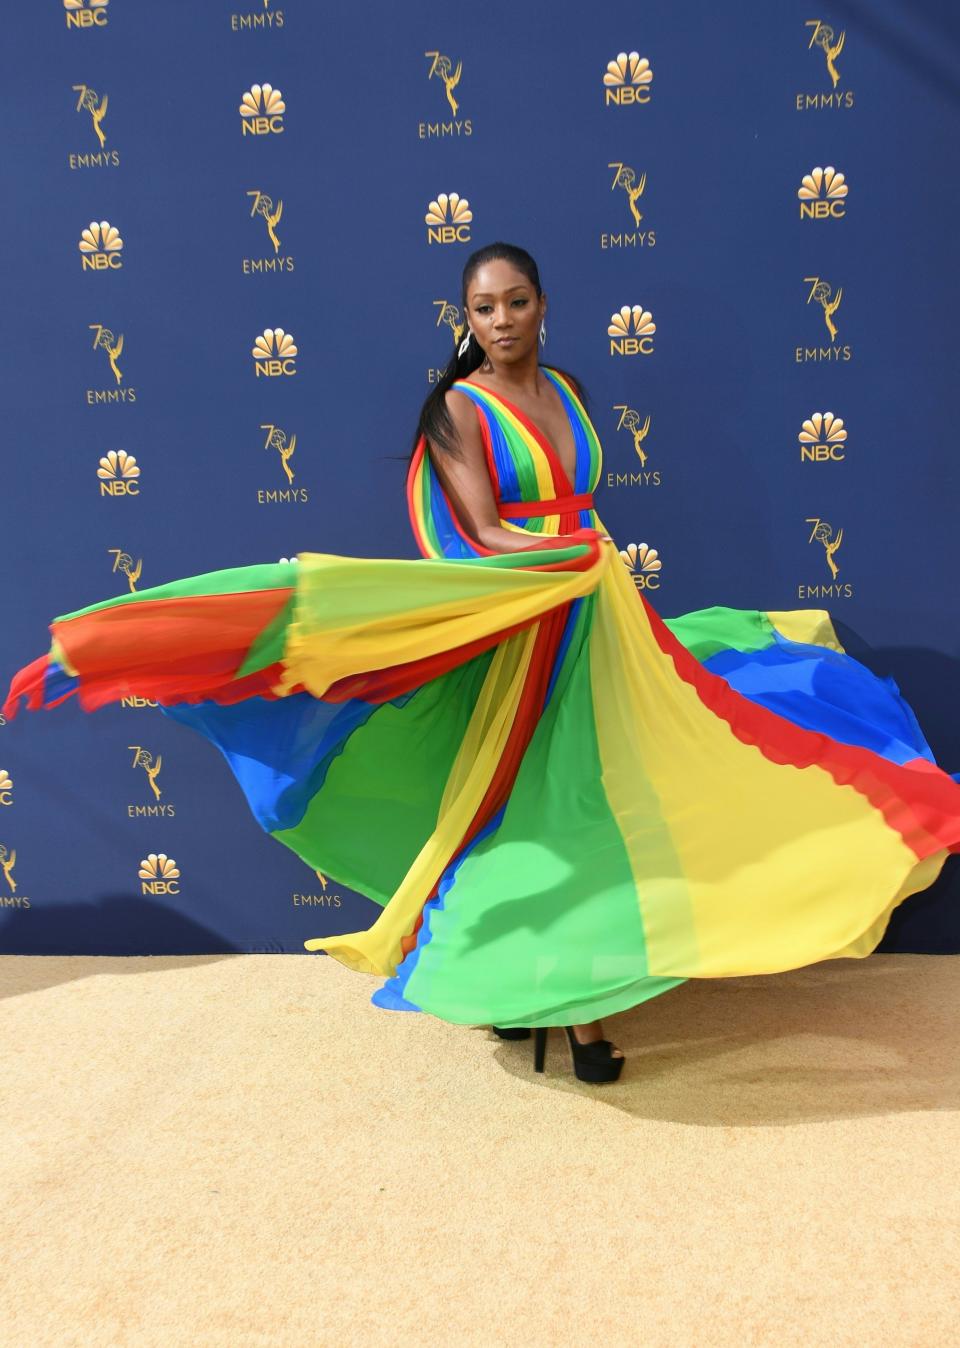 Tiffany Haddish arriving at the 2018 Primetime Emmy Awards on Sept. 17. (Photo: VALERIE MACON / Getty Images)